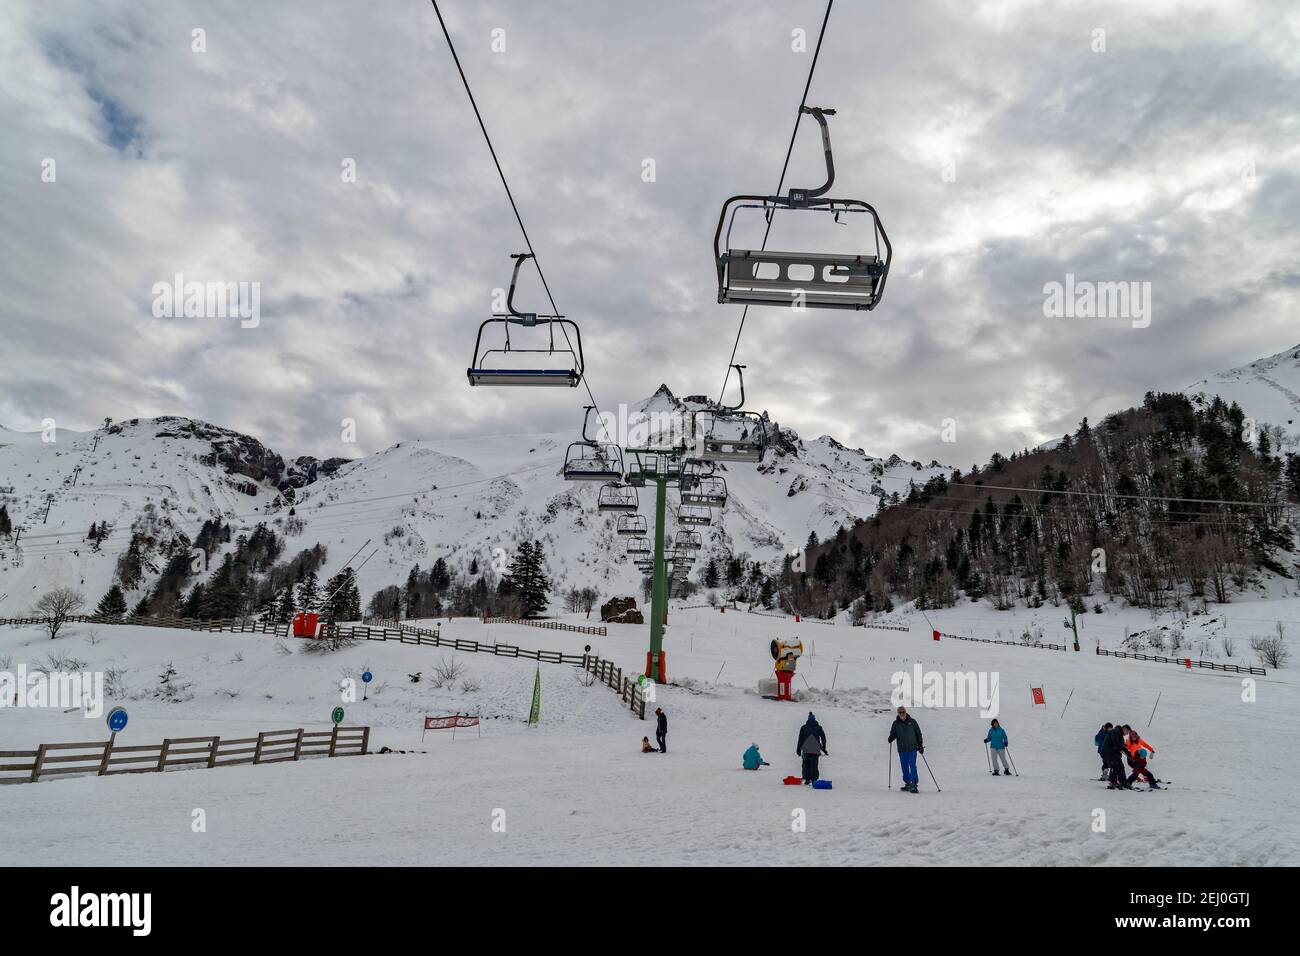 Le Mont-Dore, France. 15th Feb, 2021. The Mont-Dore resort offers a wide choice of slopes for all levels. Stock Photo